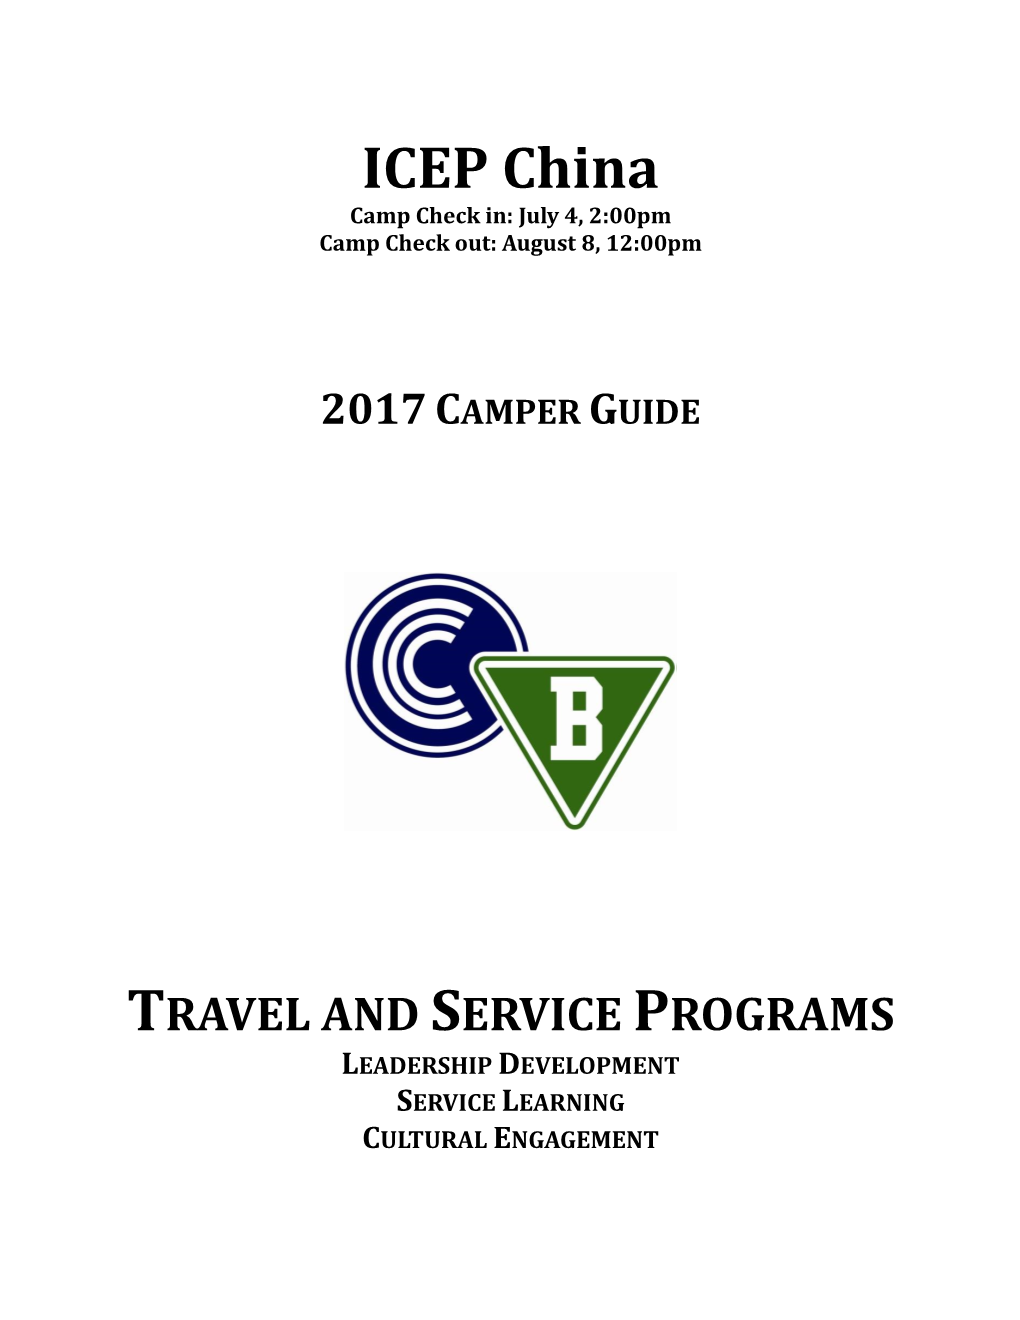 ICEP China Camp Check In: July 4, 2:00Pm Camp Check Out: August 8, 12:00Pm